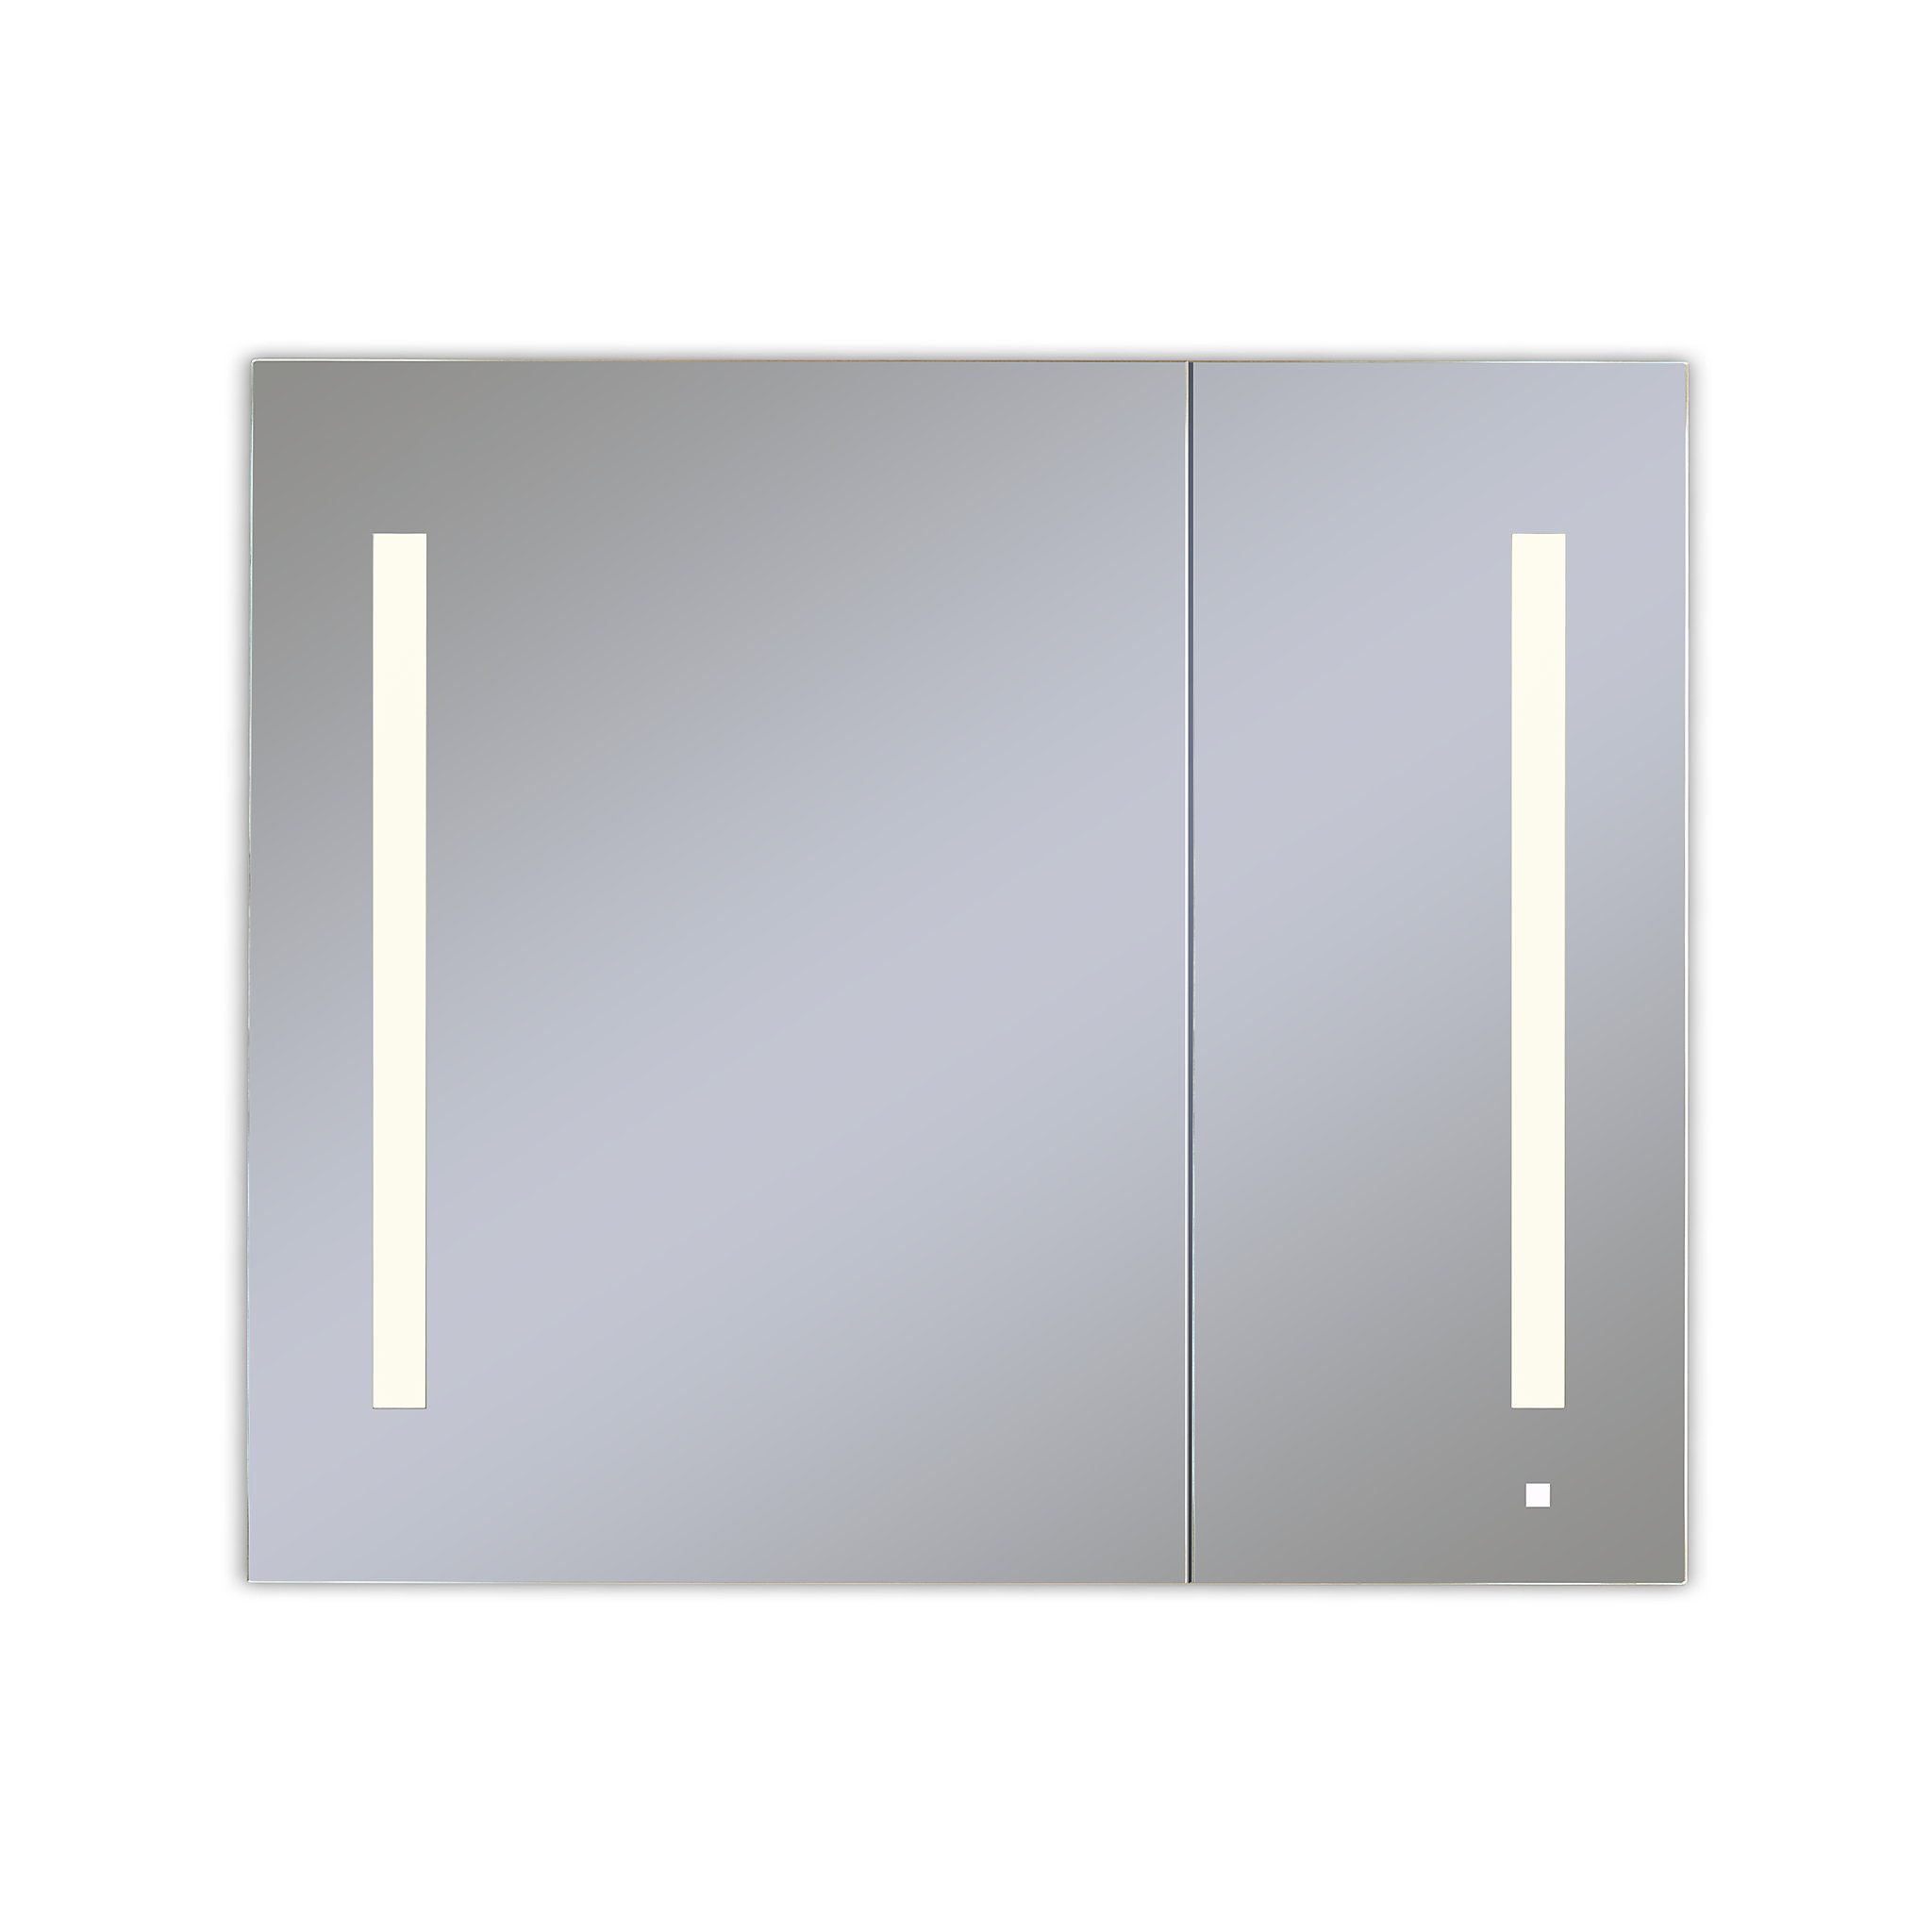 Robern AC3630D4P2LAW AiO Lighted Cabinet, 36" x 30" x 4", Two Door, LUM Lighting, 2700K Temperature (Warm Light), Dimmable, OM A